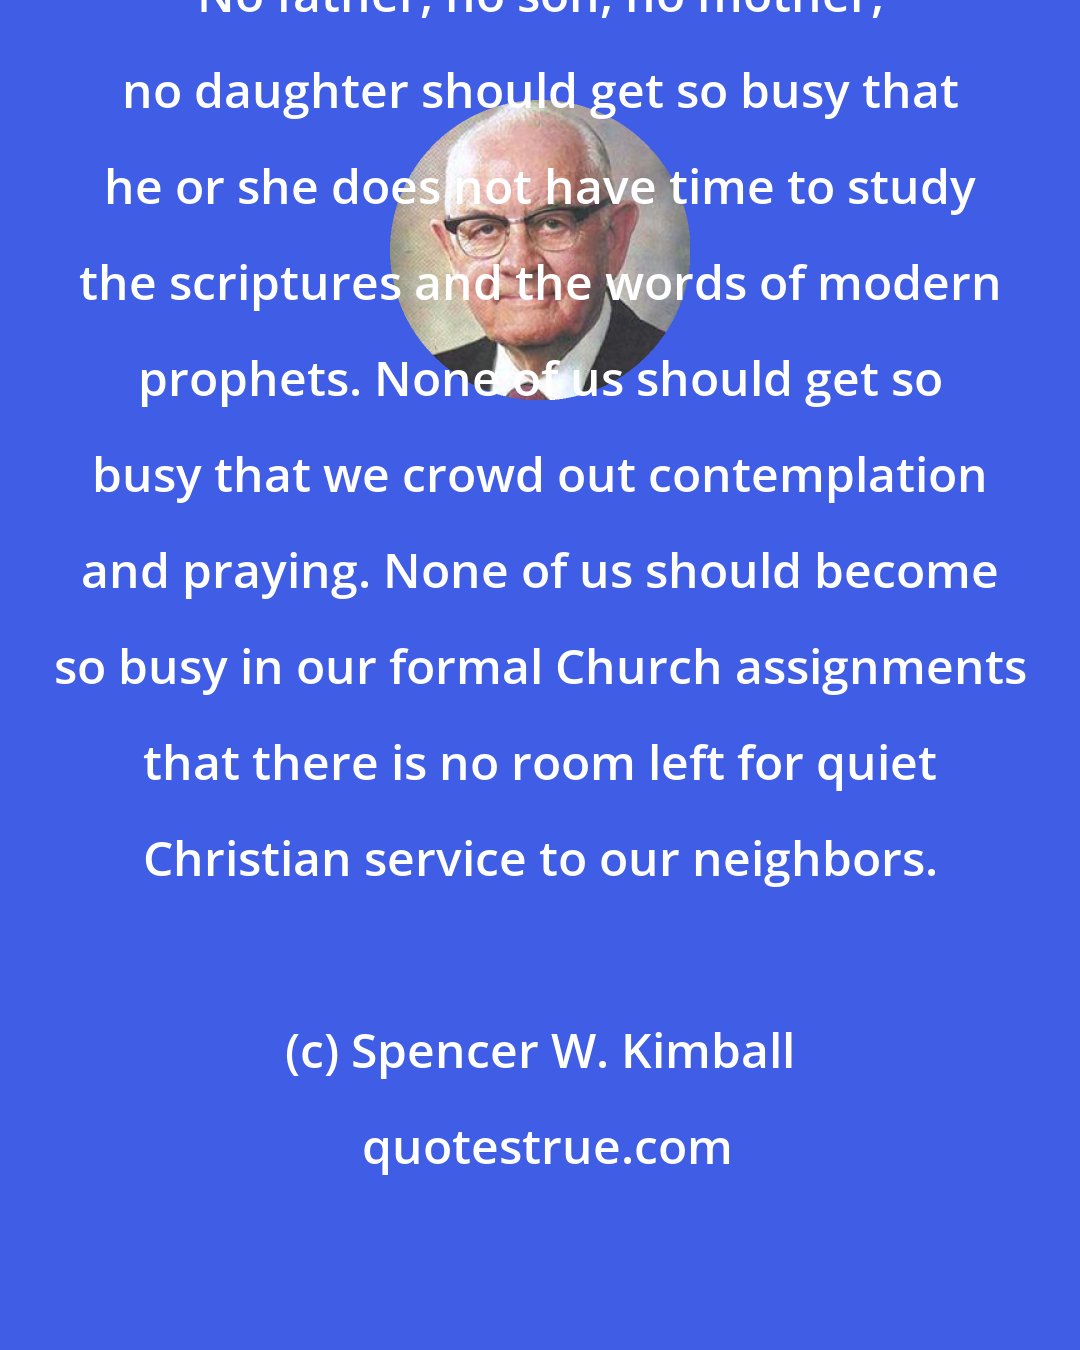 Spencer W. Kimball: No father, no son, no mother, no daughter should get so busy that he or she does not have time to study the scriptures and the words of modern prophets. None of us should get so busy that we crowd out contemplation and praying. None of us should become so busy in our formal Church assignments that there is no room left for quiet Christian service to our neighbors.